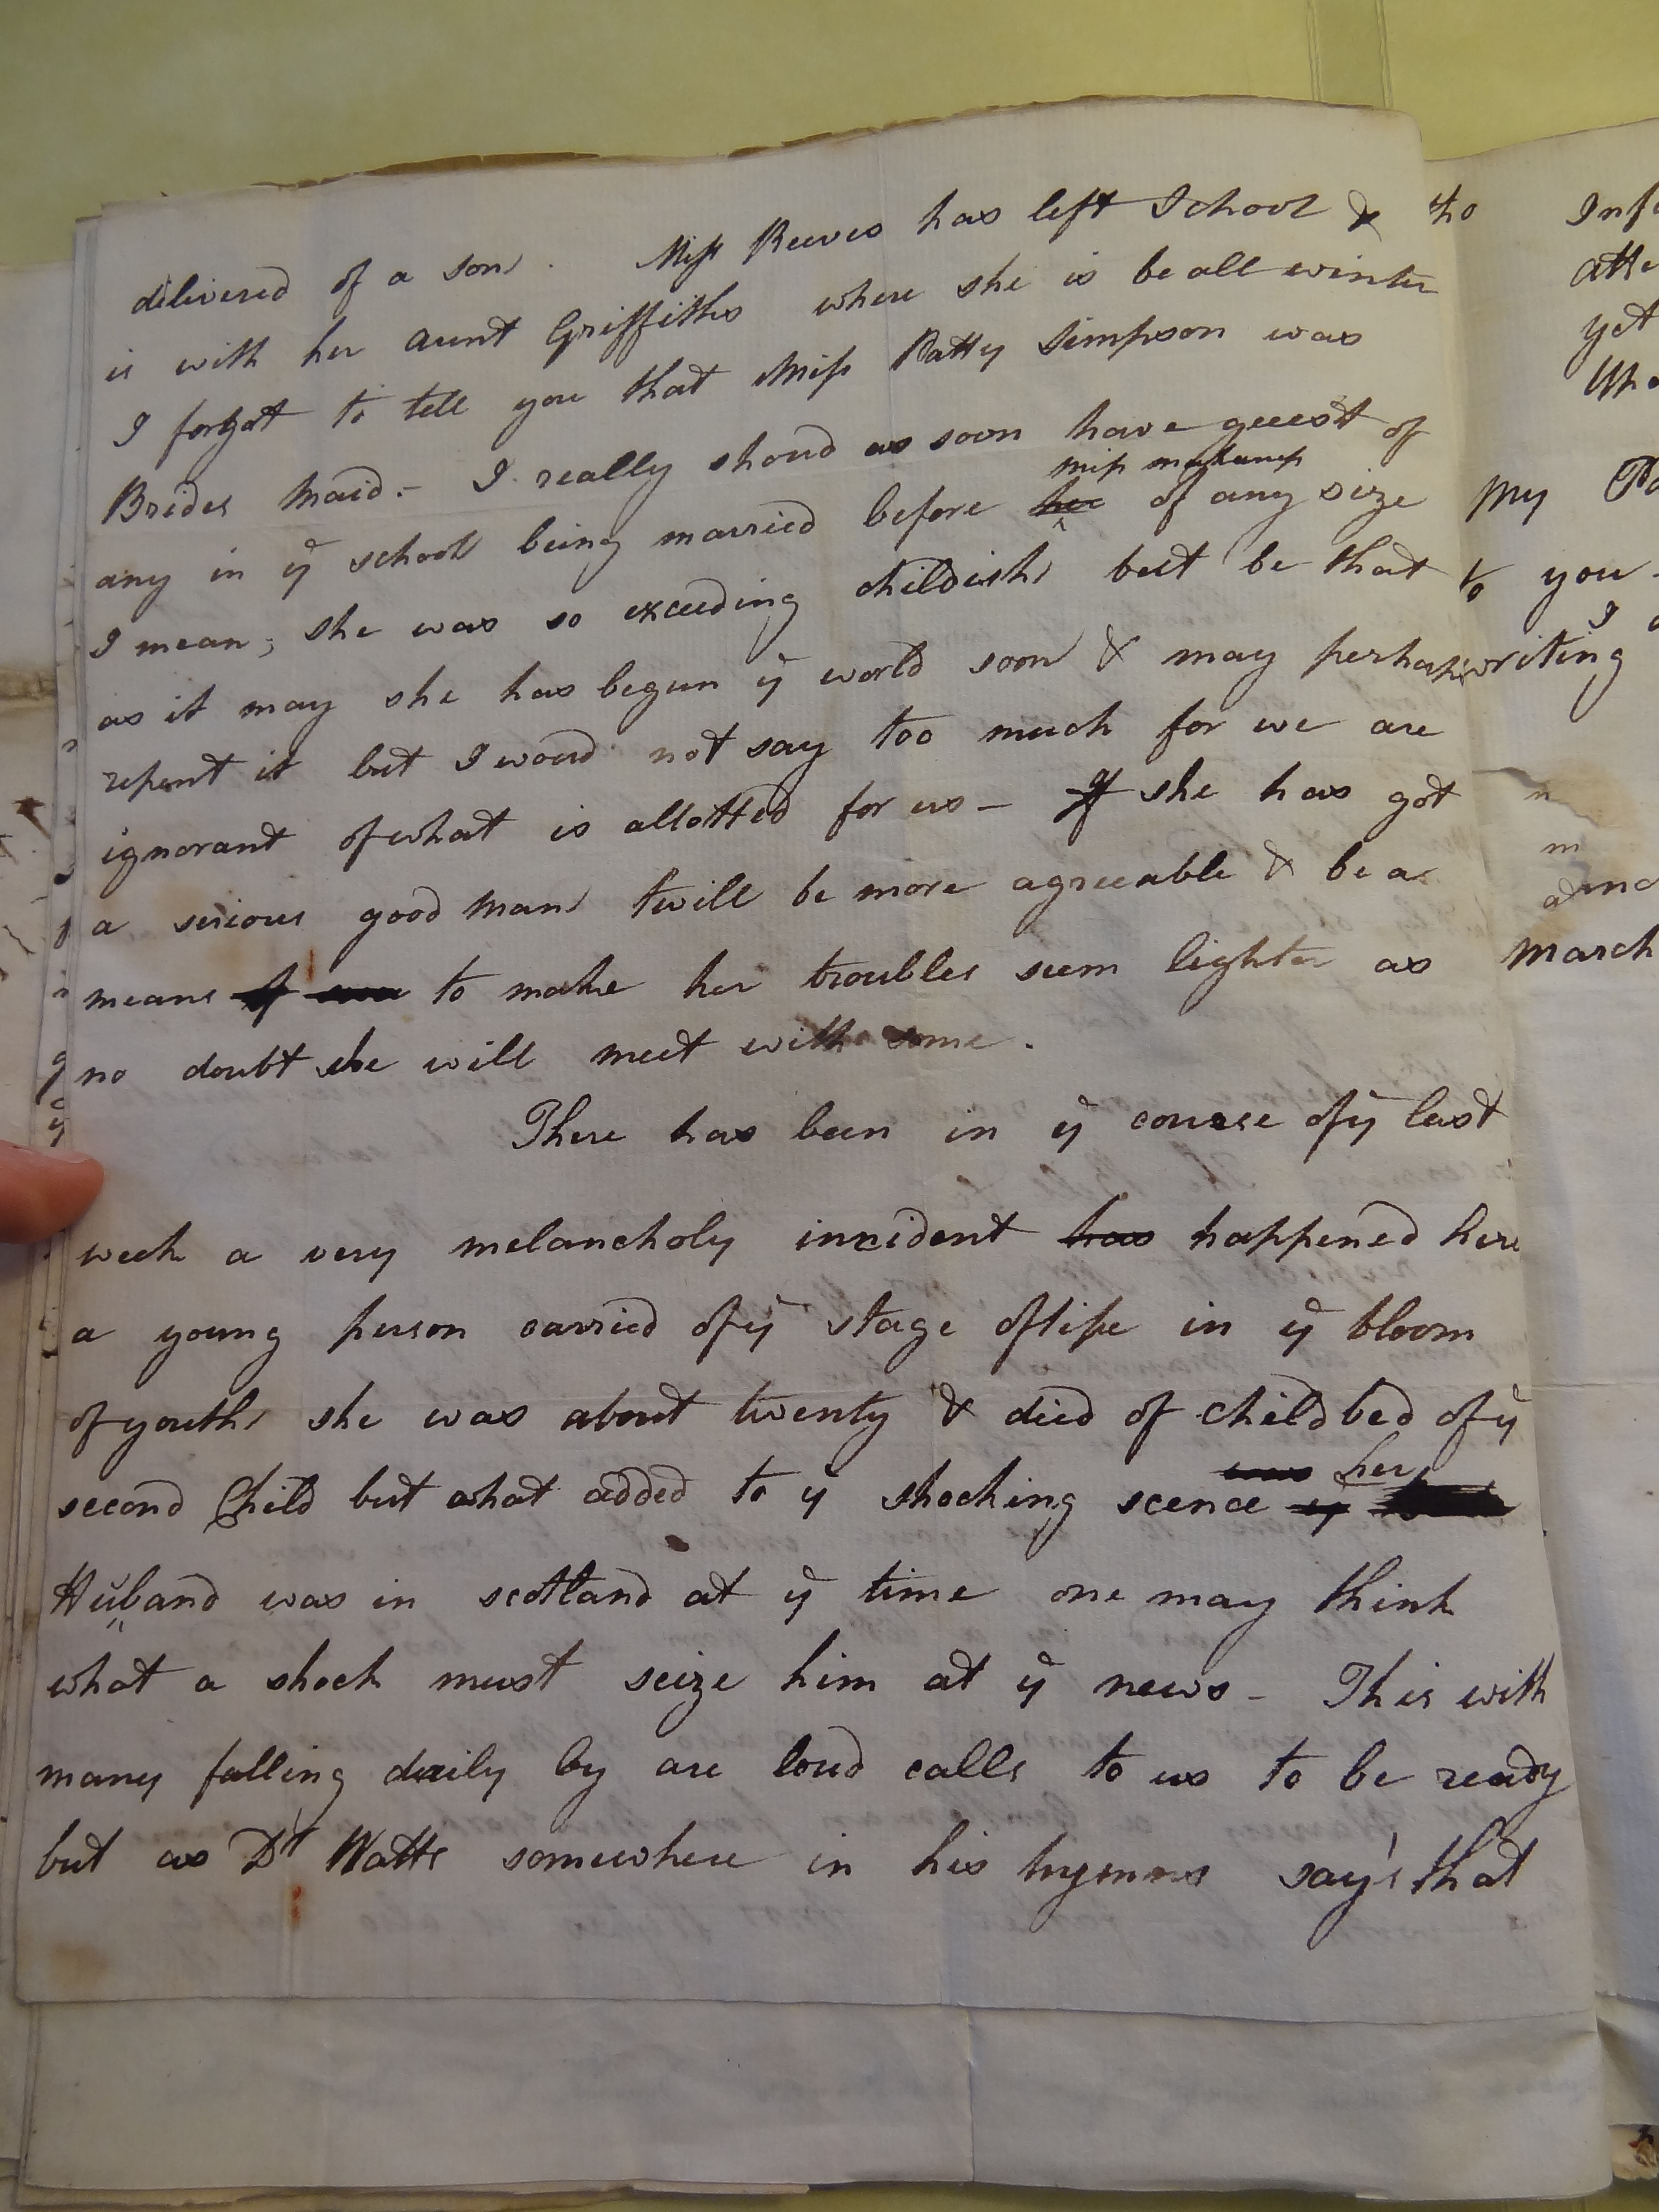 Image #2 of letter: Rebekah Bateman to Mary Jane Hodson, 7 March 1782